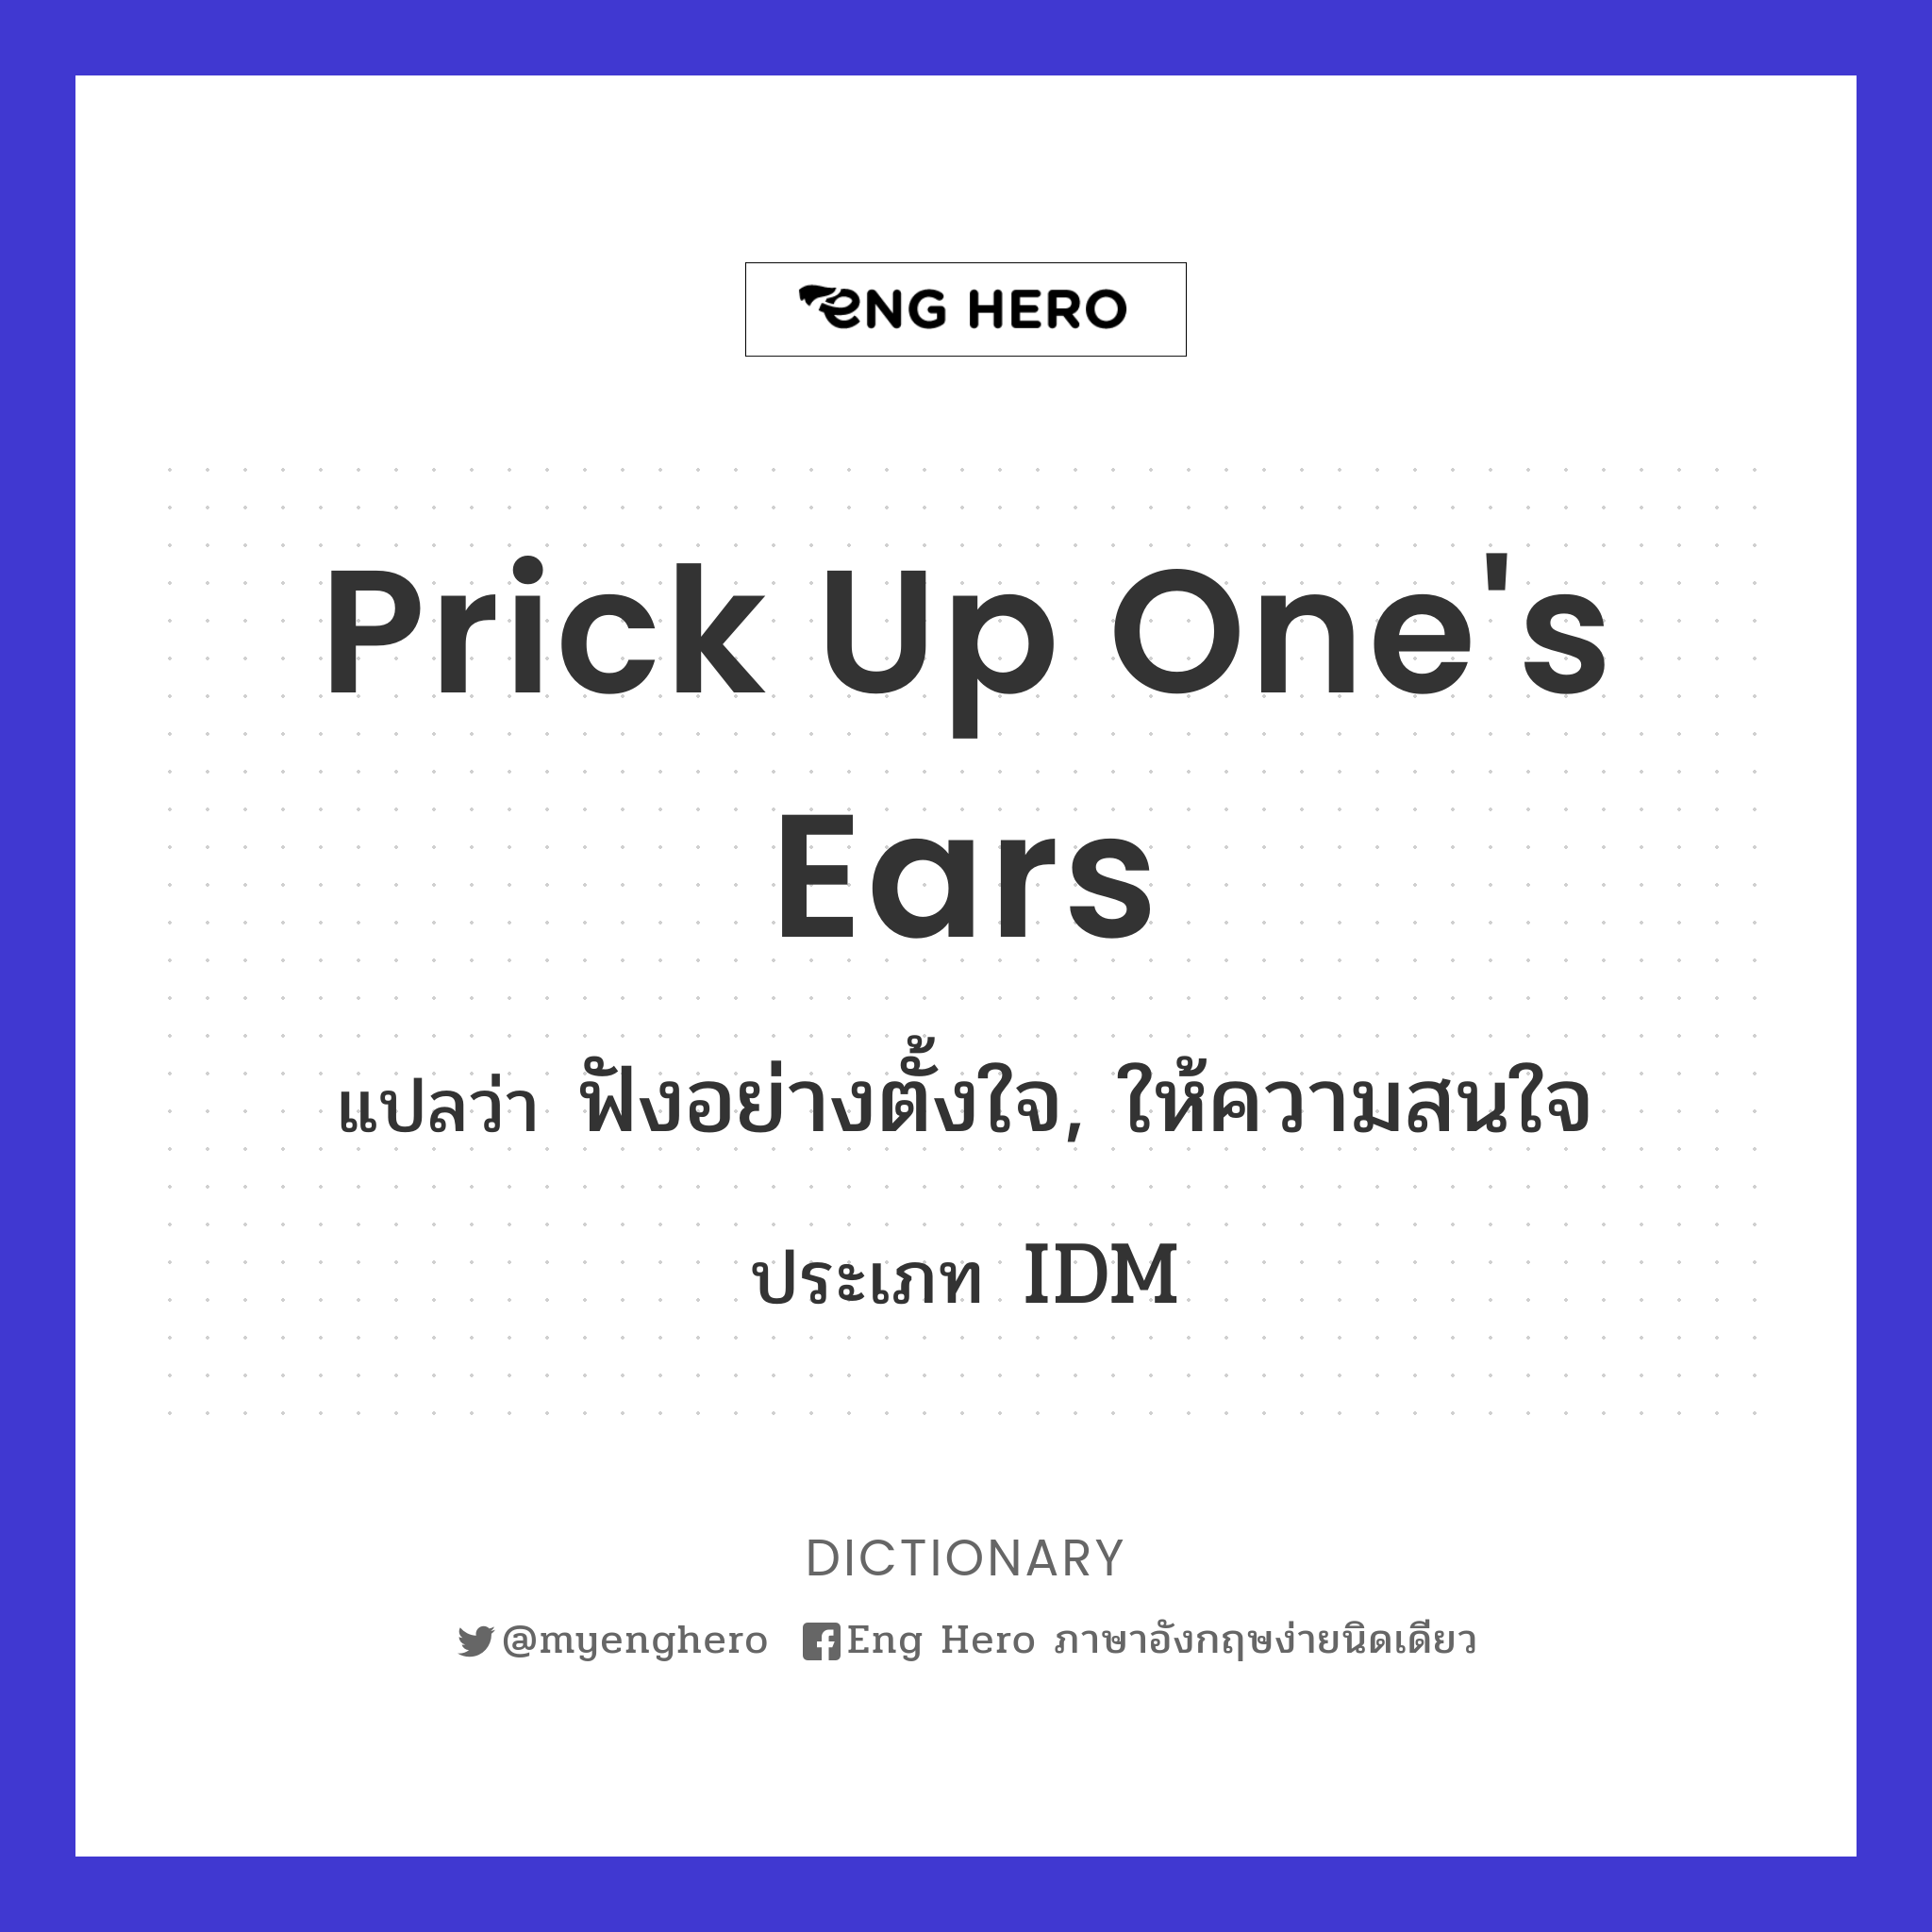 prick up one's ears